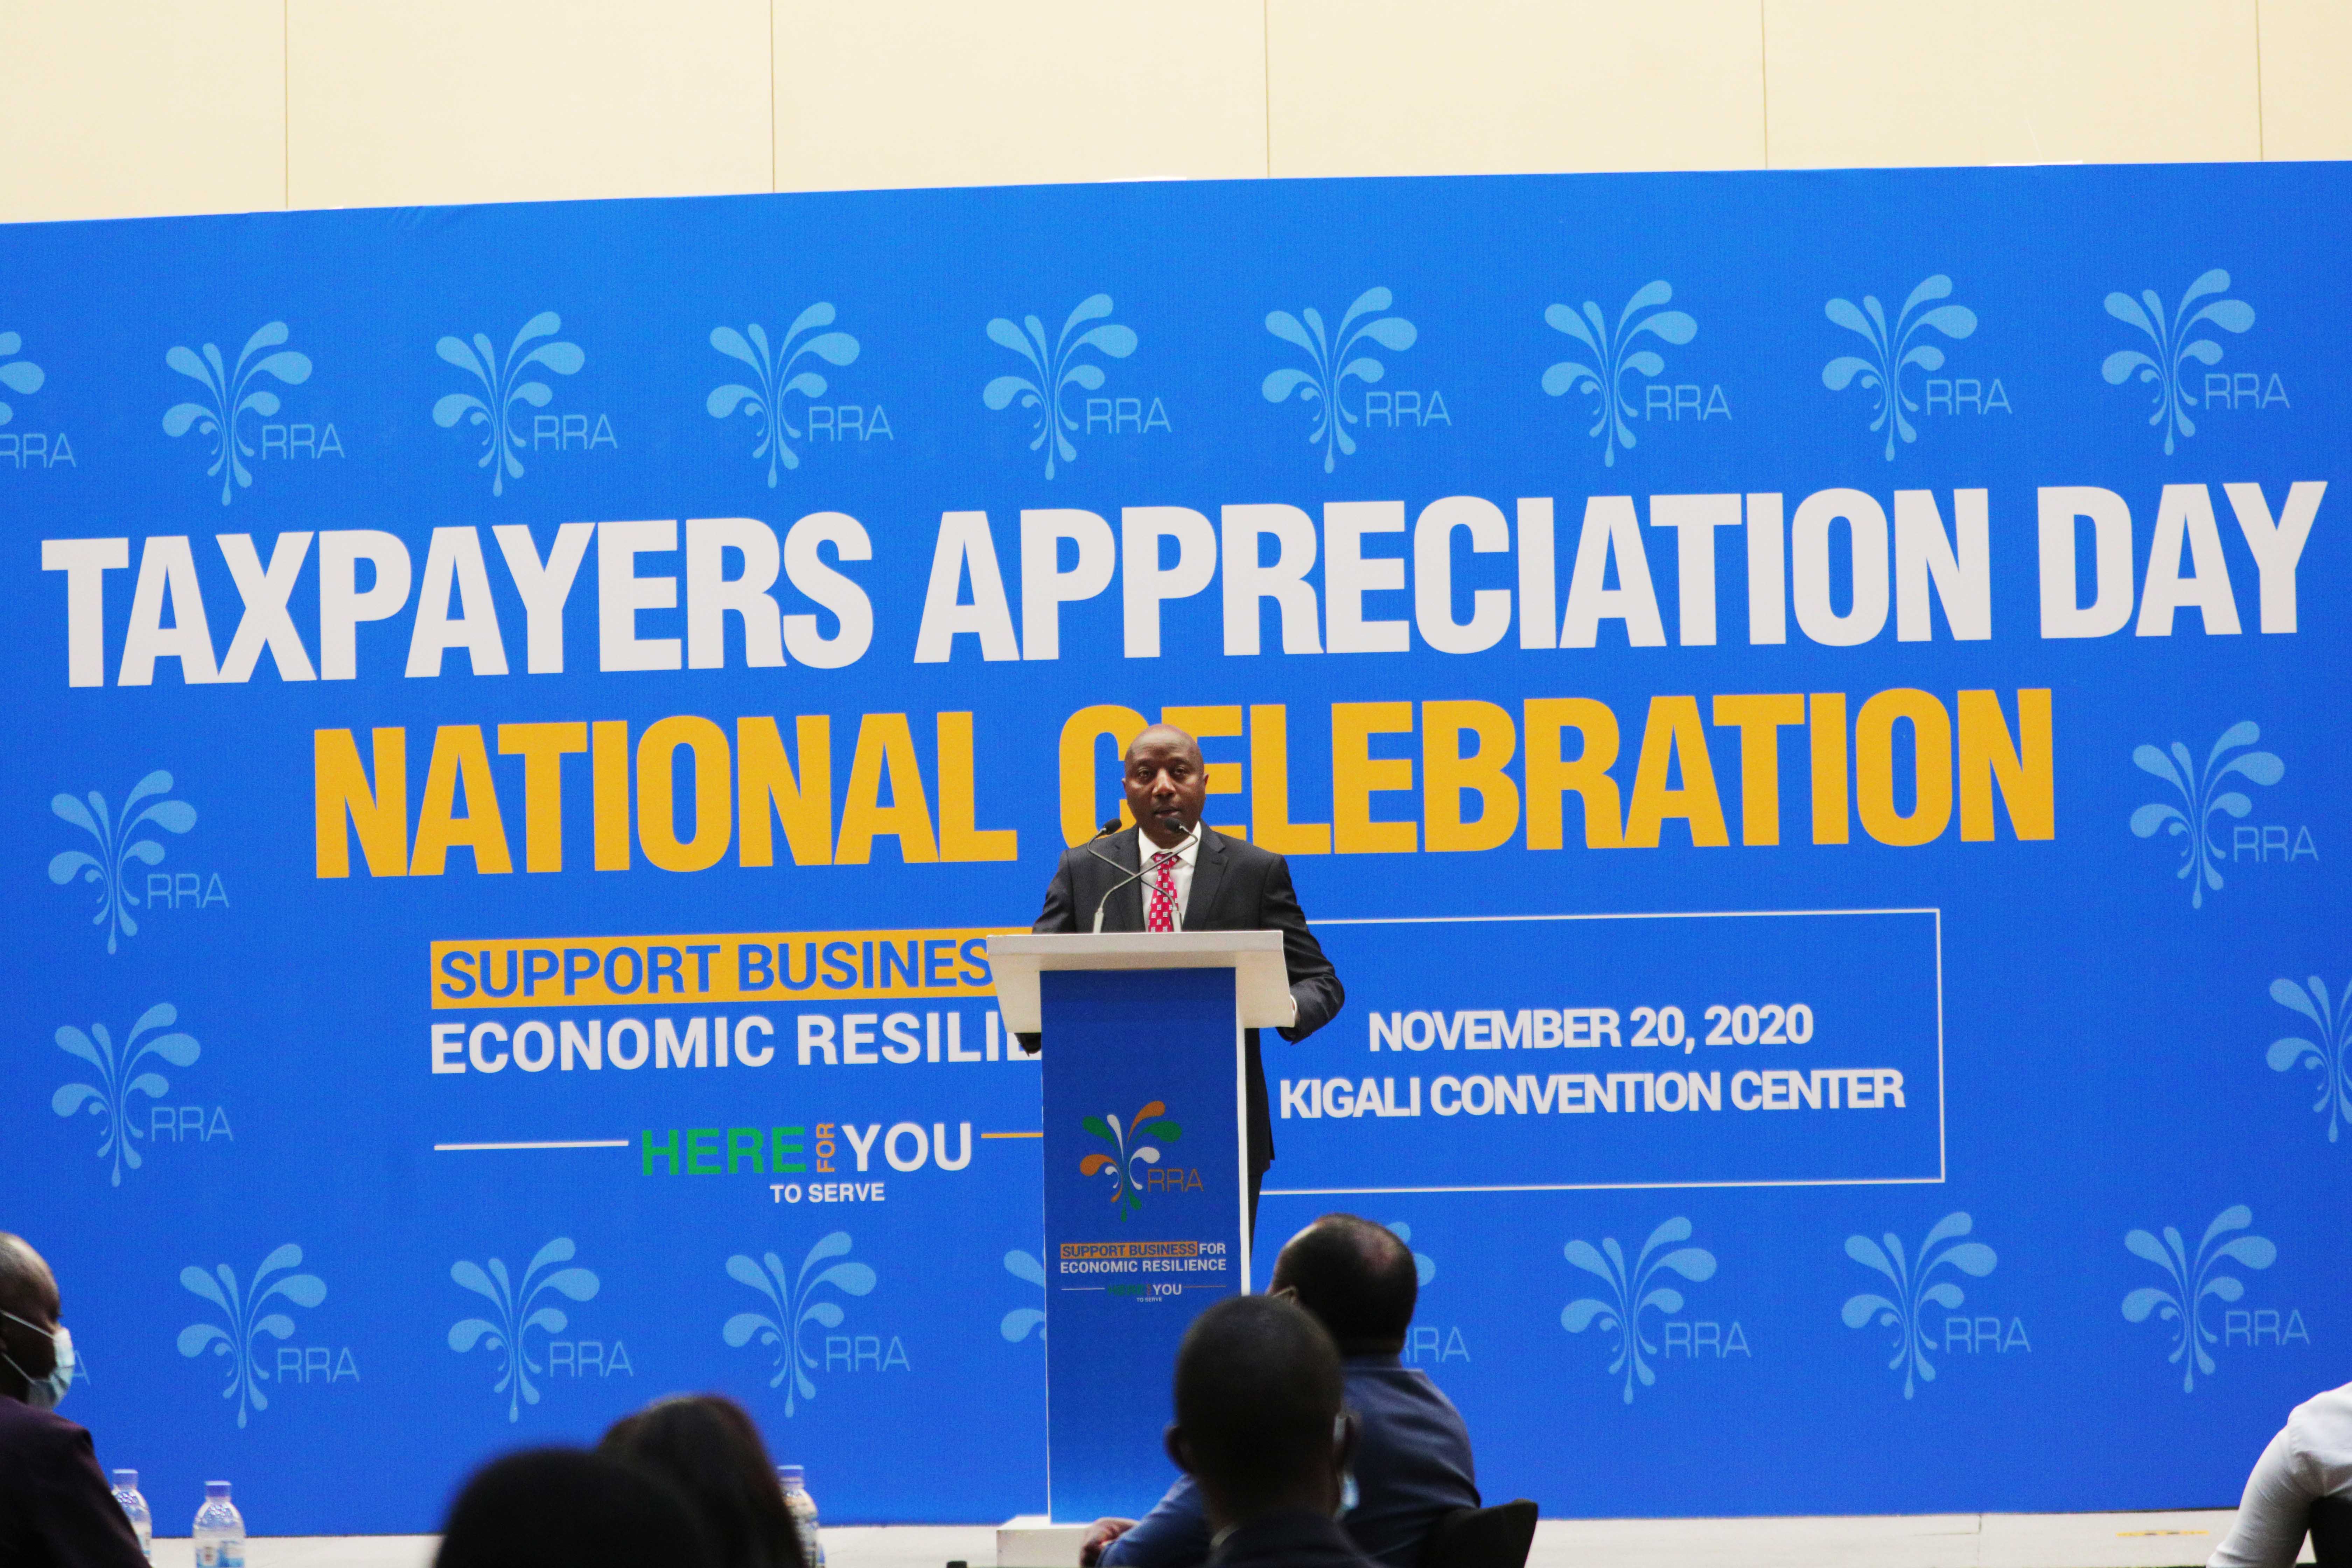 Prime Minister Edouard Ngirente delivers remarks during Taxpayers Appreciation Day event in Kigali on 20 November 2020 .Sam Ngendahimana